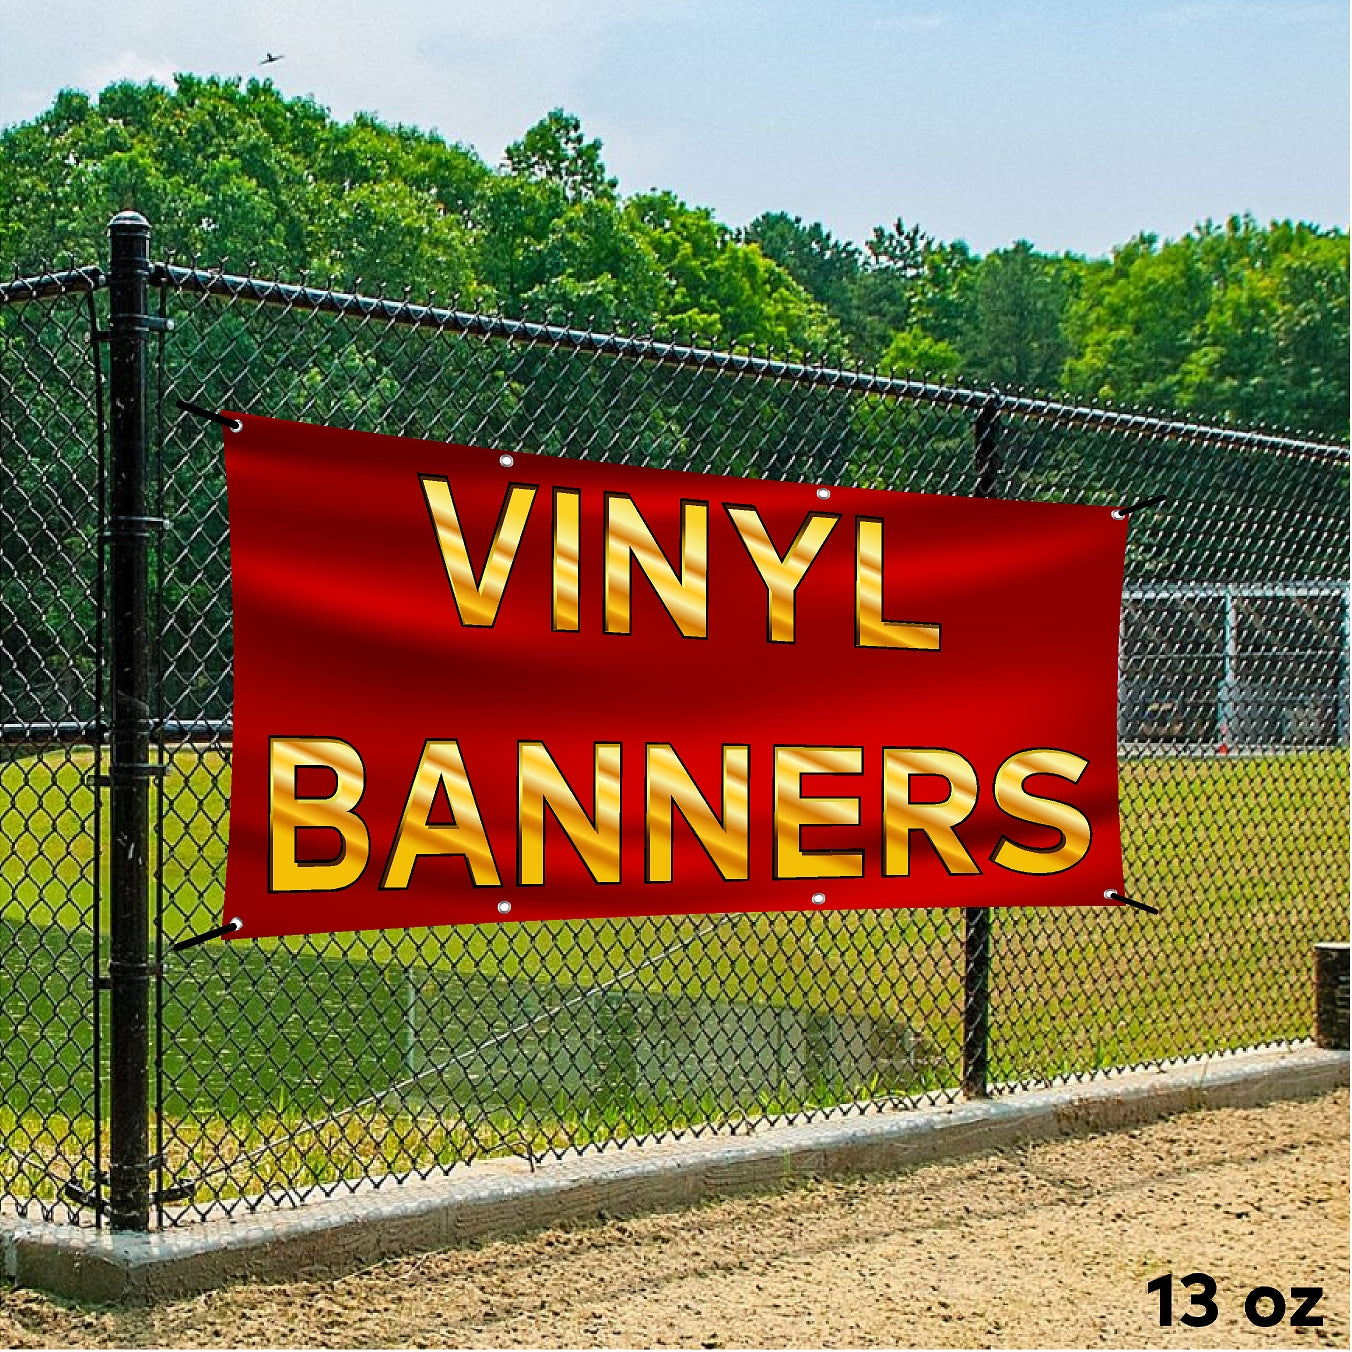 Banners - Custom Banners Made in Tazewell, Virginia - 13 Ounce Full Color Printed Banners - RSGfx.com